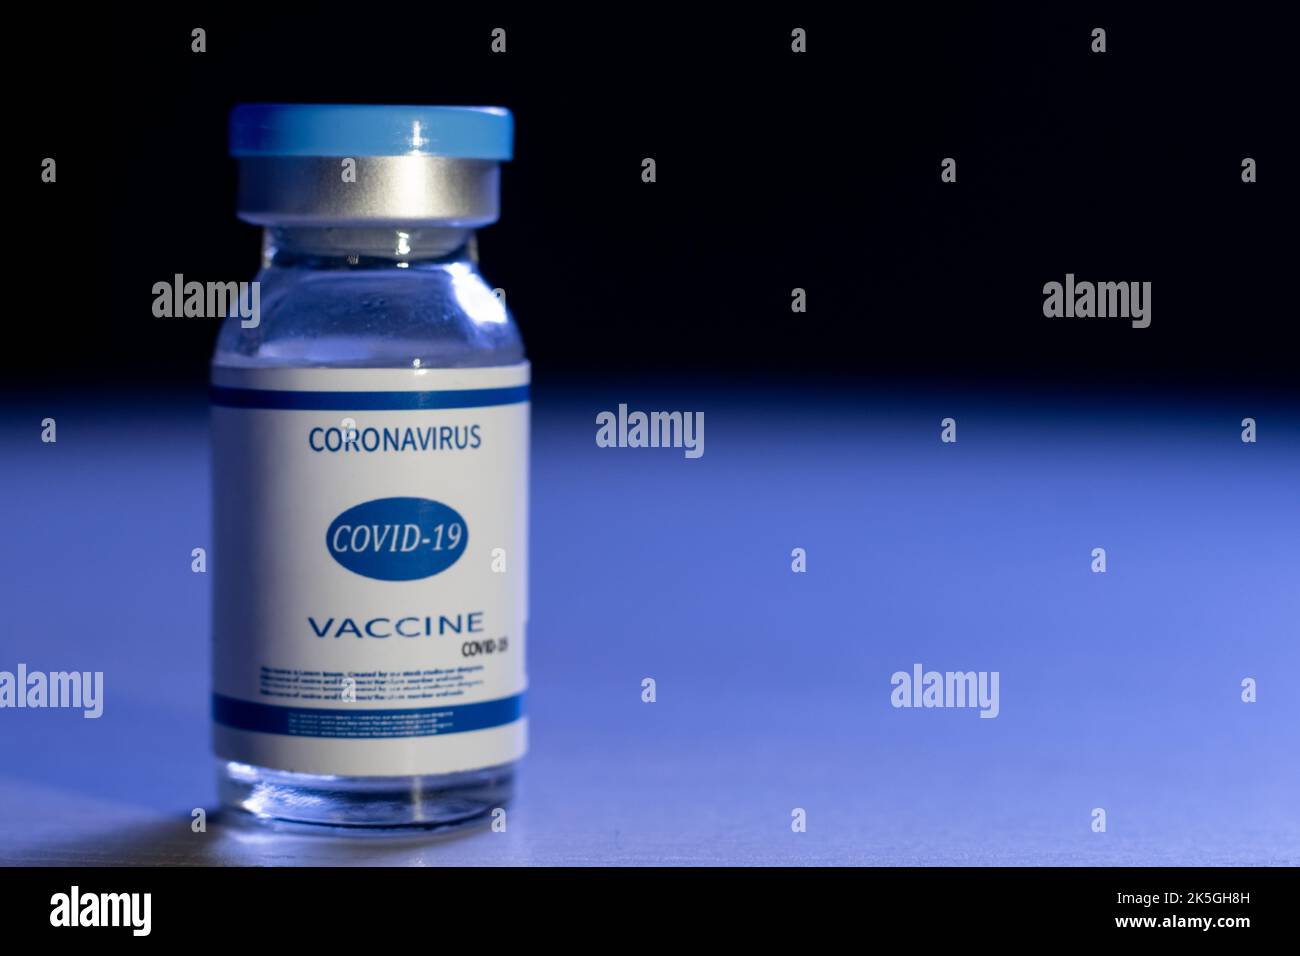 Coronavirus vaccine. Pandemic banner. Covid-19 inoculation. Healthcare industry. Blue dose vial glass bottle with label on defocused dark copy space b Stock Photo